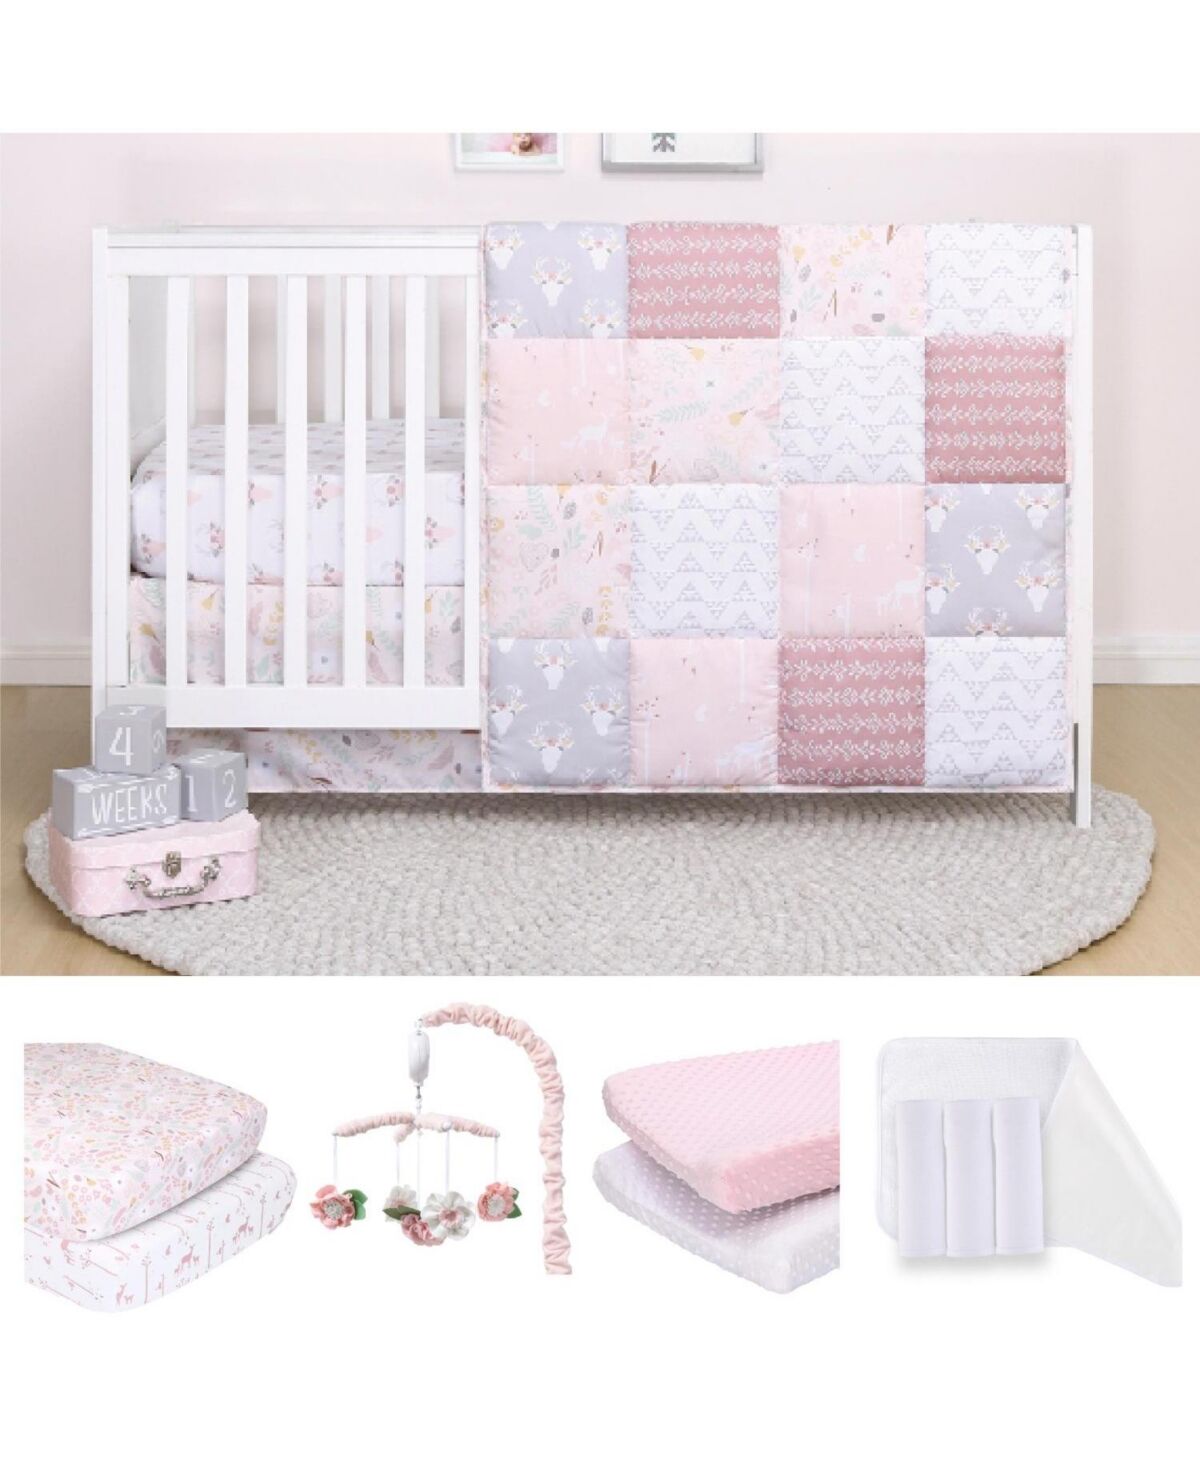 The Peanutshell Meadow 12 Piece Baby Nursery Crib Bedding Set, Quilt, Crib Sheets, Crib Skirt, Changing Pad Covers and Liners, and Mobile - Pink/white